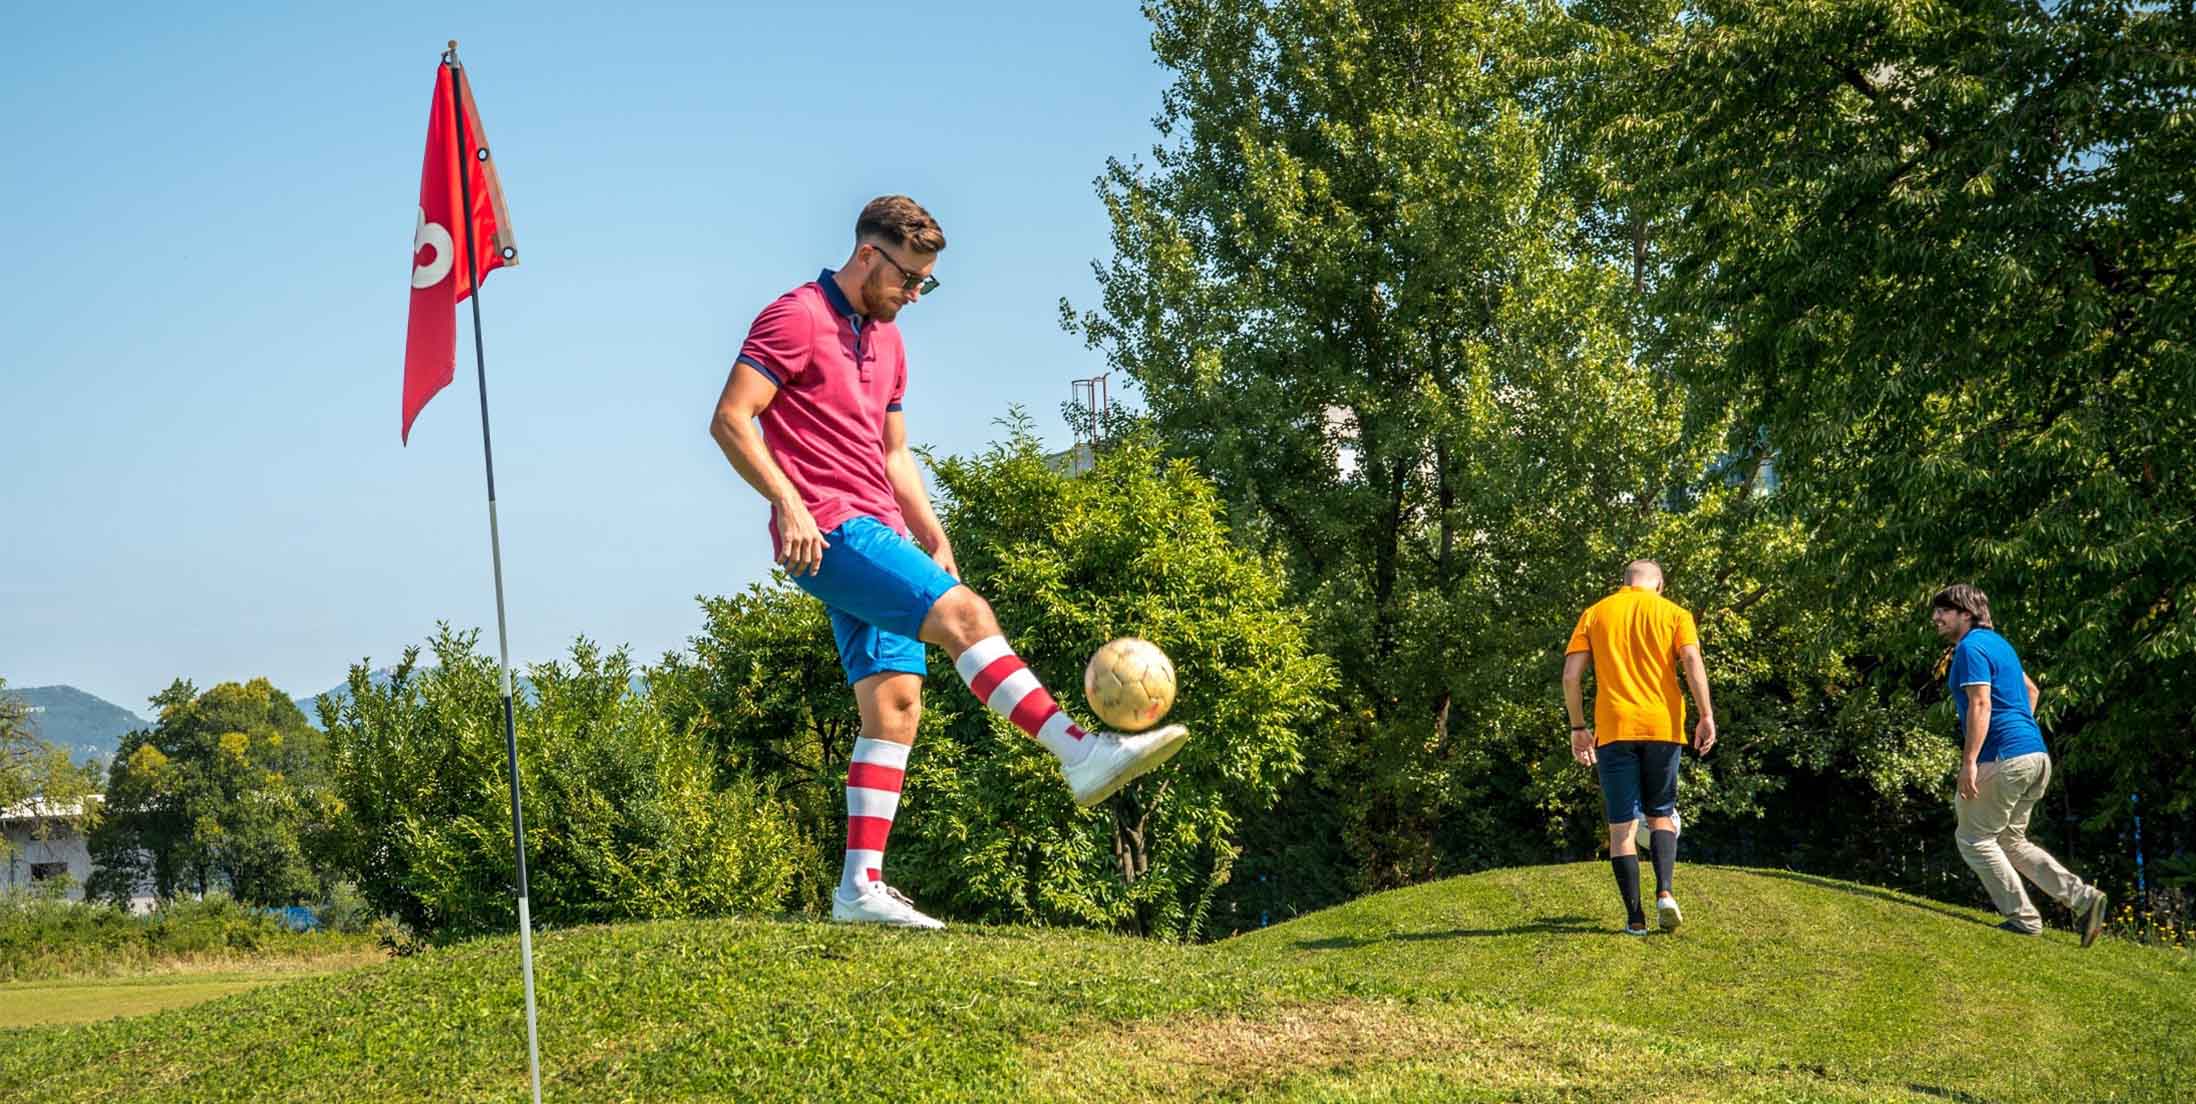 Top Stag Do Ideas & Activities - Footgolf